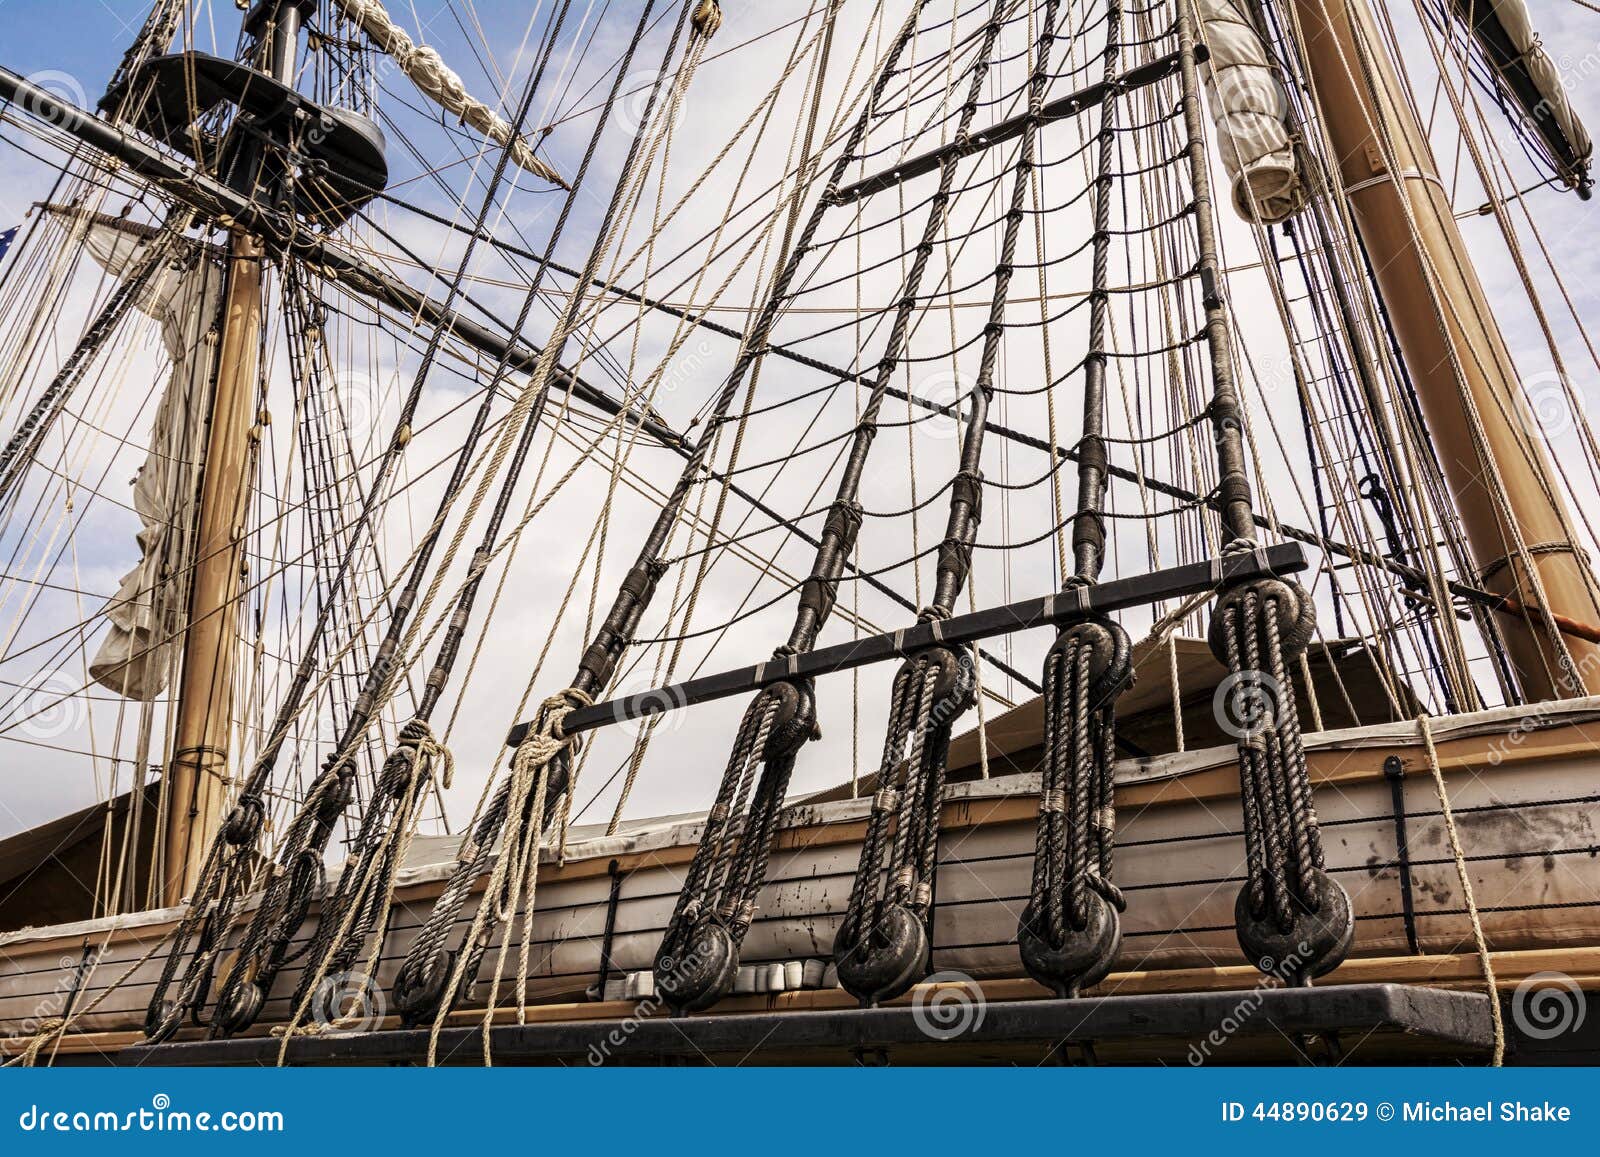 Tall Ship Rigging stock image. Image of commodore 